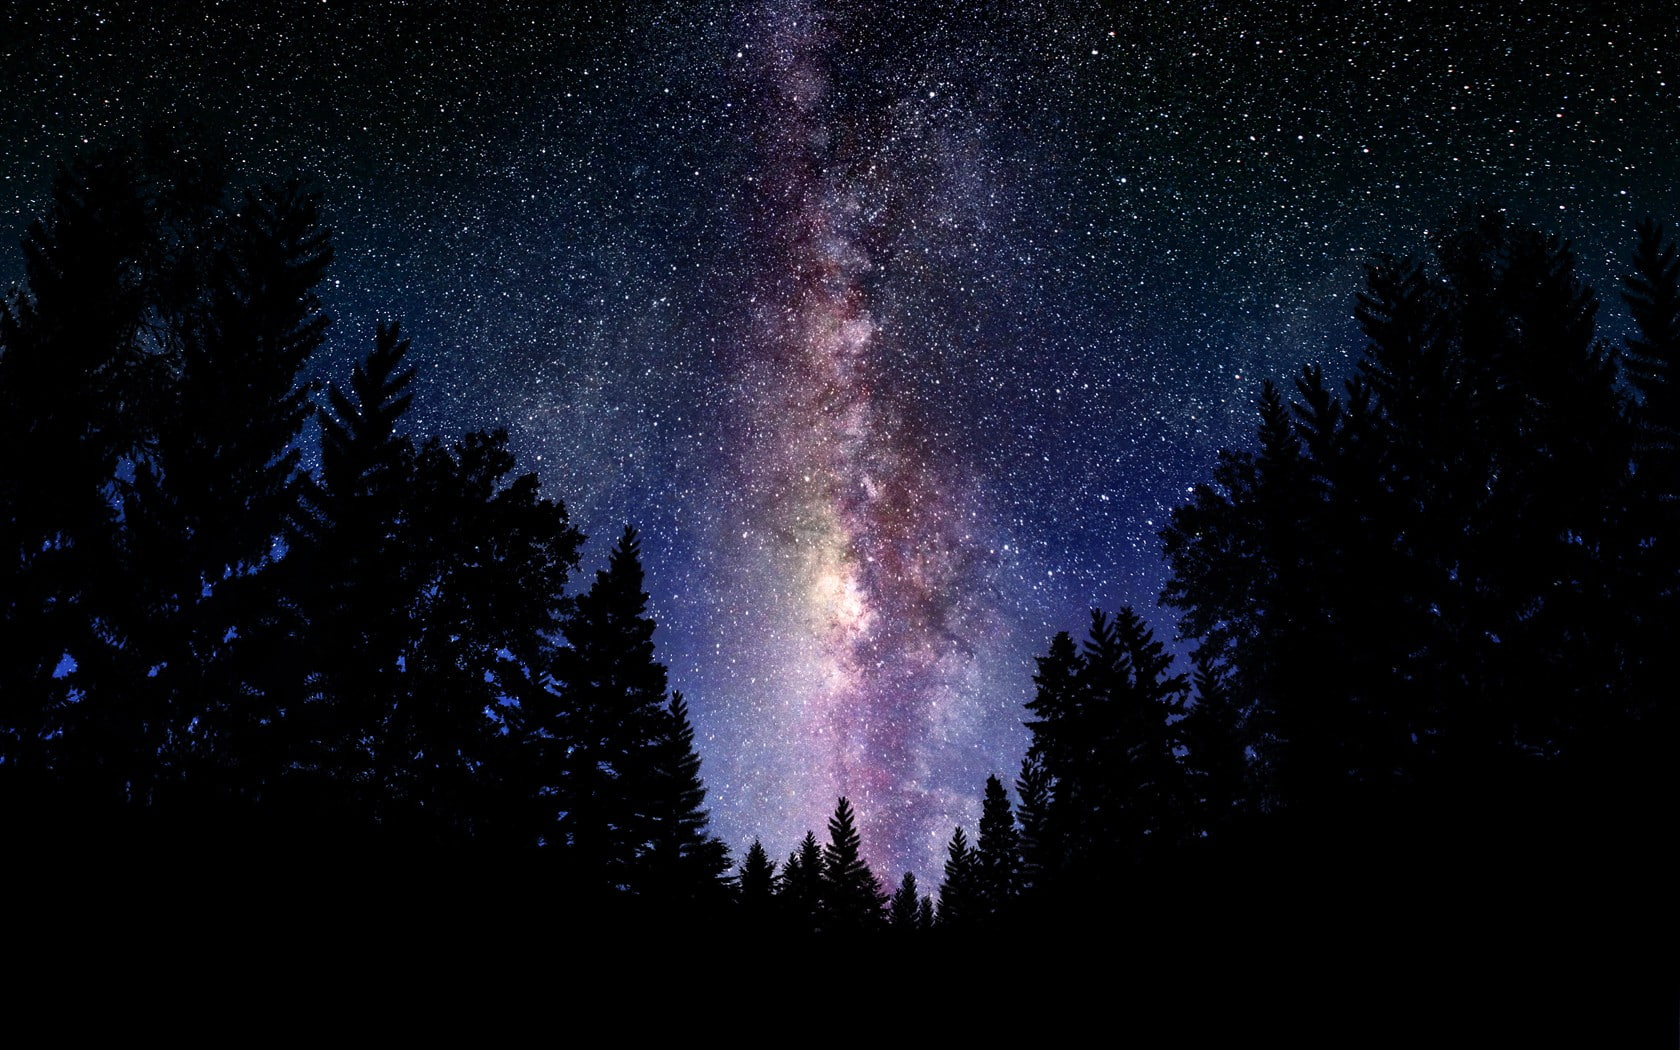 silhouette of trees at night, stars, Milky Way, space art, nature